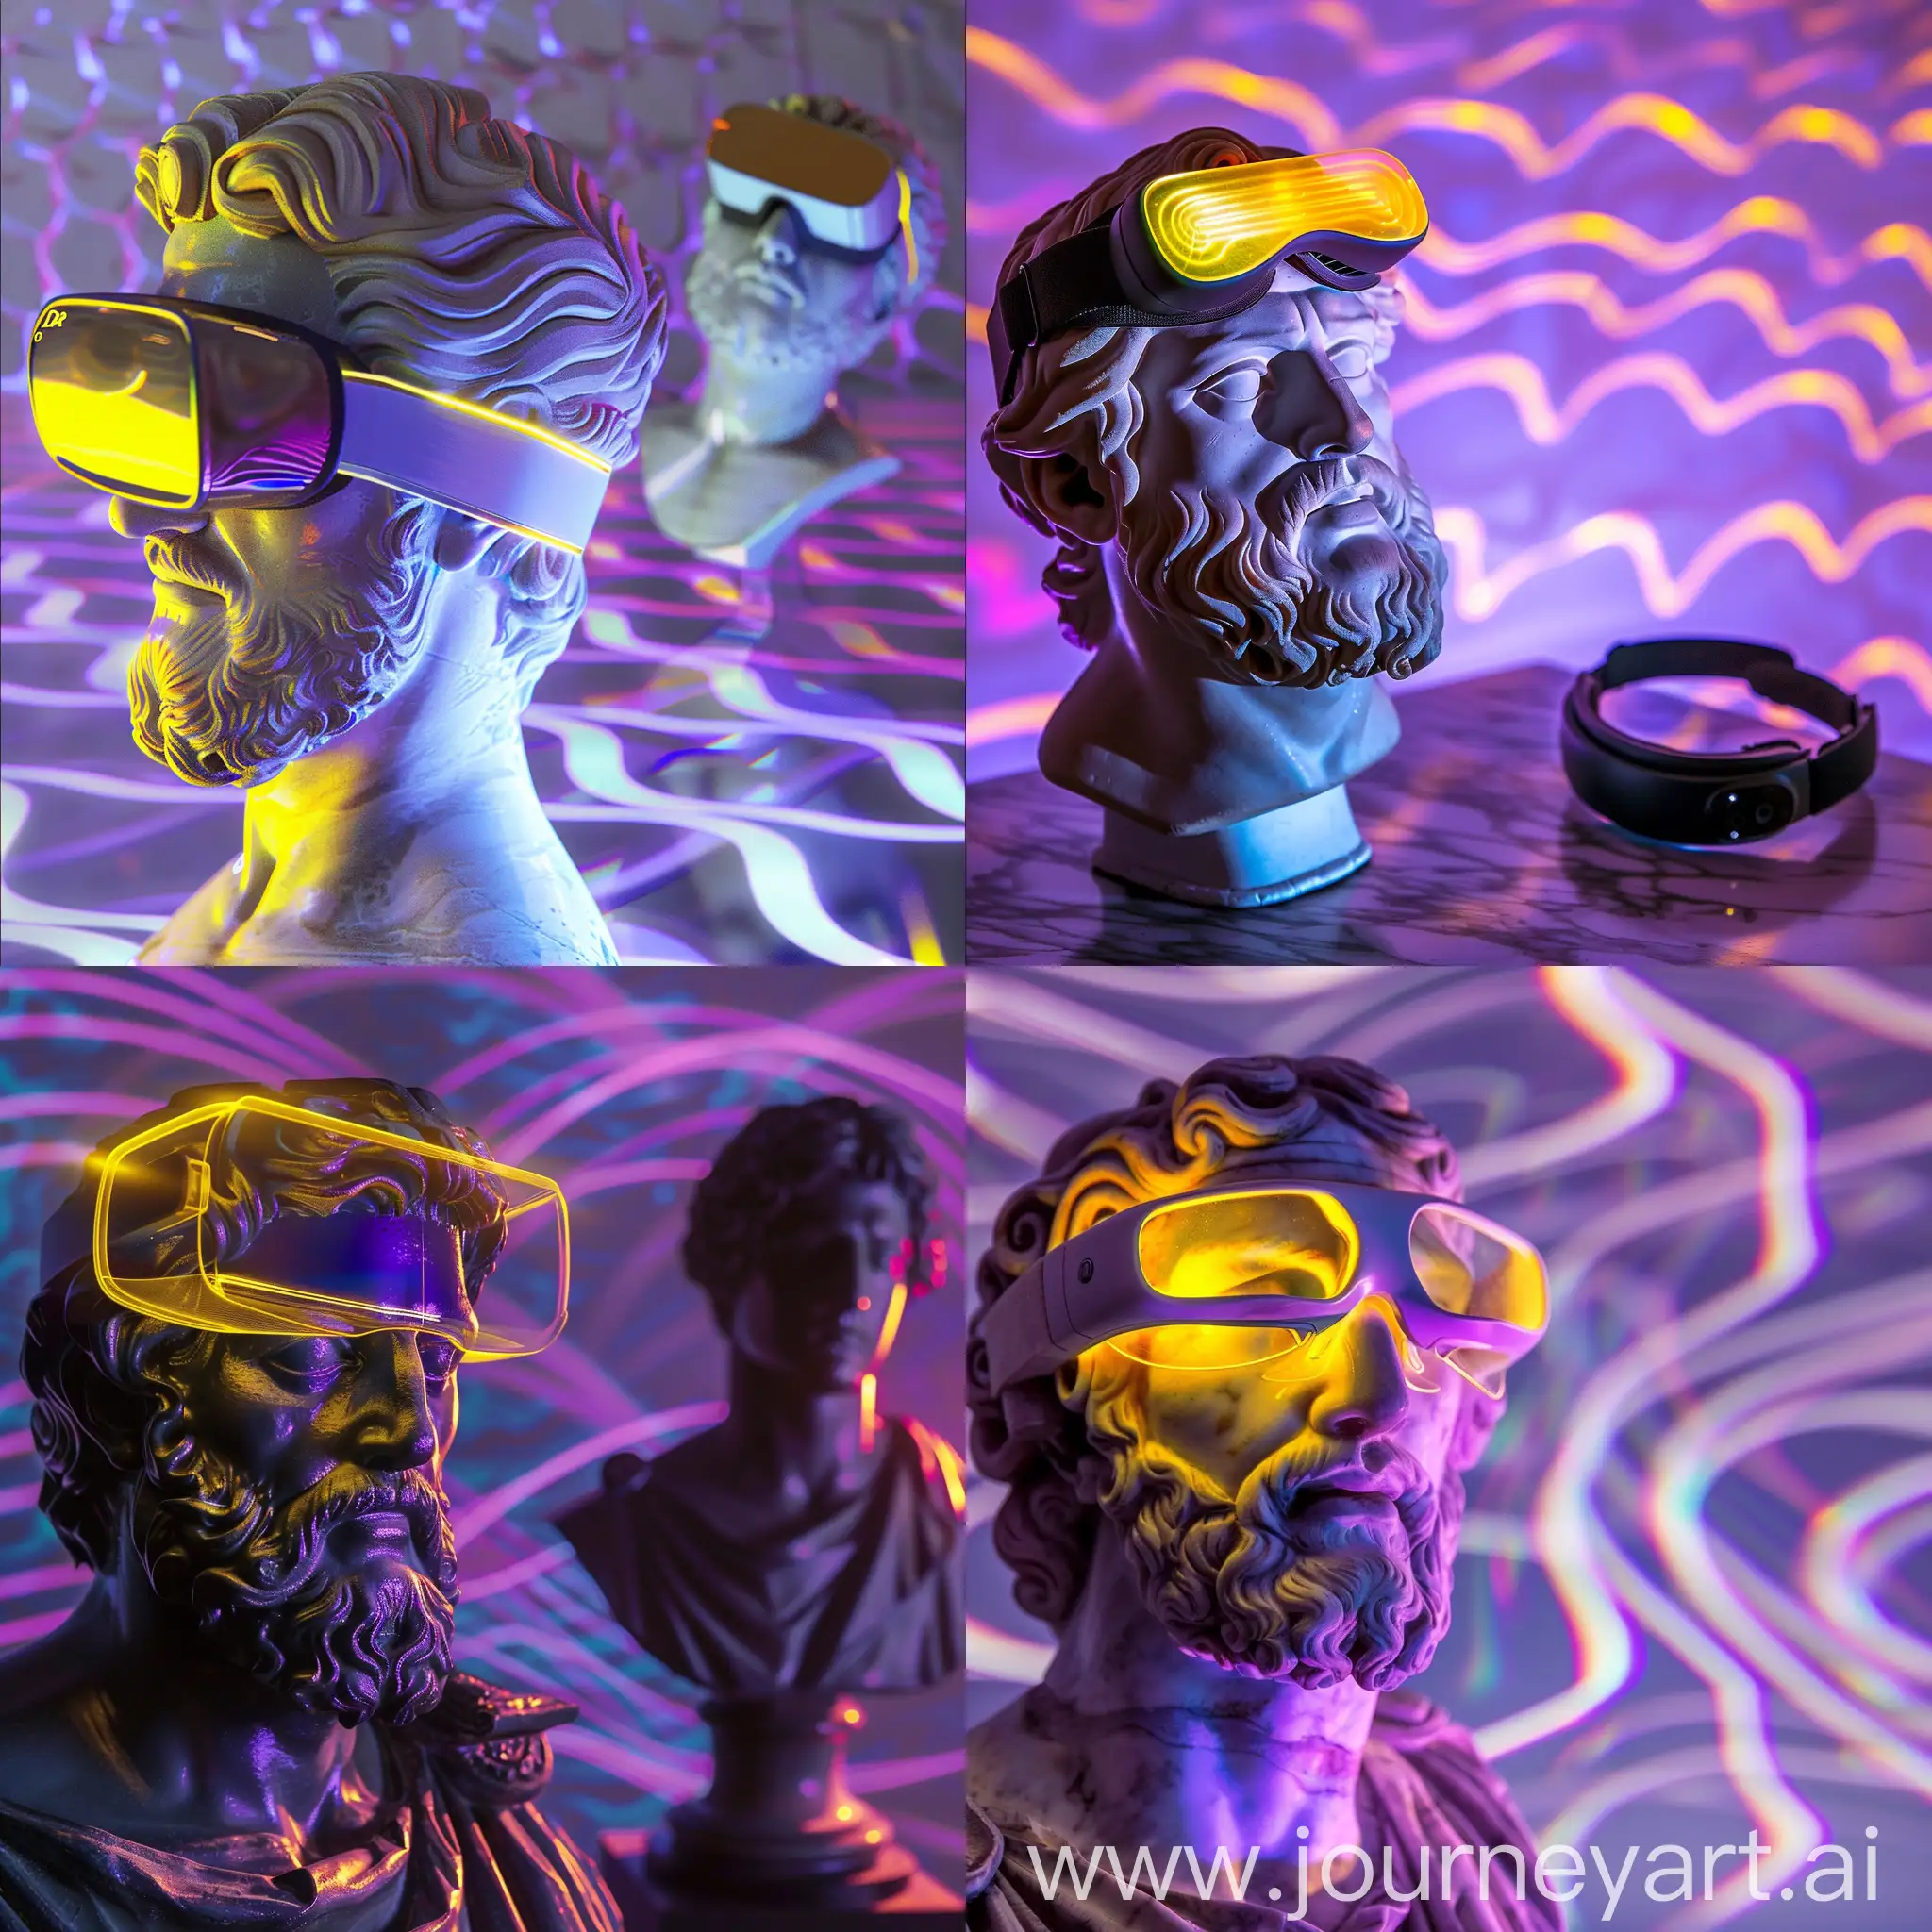 A Sculpture of Greek Philosopher in the Left of Photo, Bust Style, Headshot Pose, VR Glasses on Sculpture Eyes, Yellow Light on Top of VR Glasses, Purple Light Reflections, Dar Theme, Wave Pattern in Background, Medium Shot, High Quality 